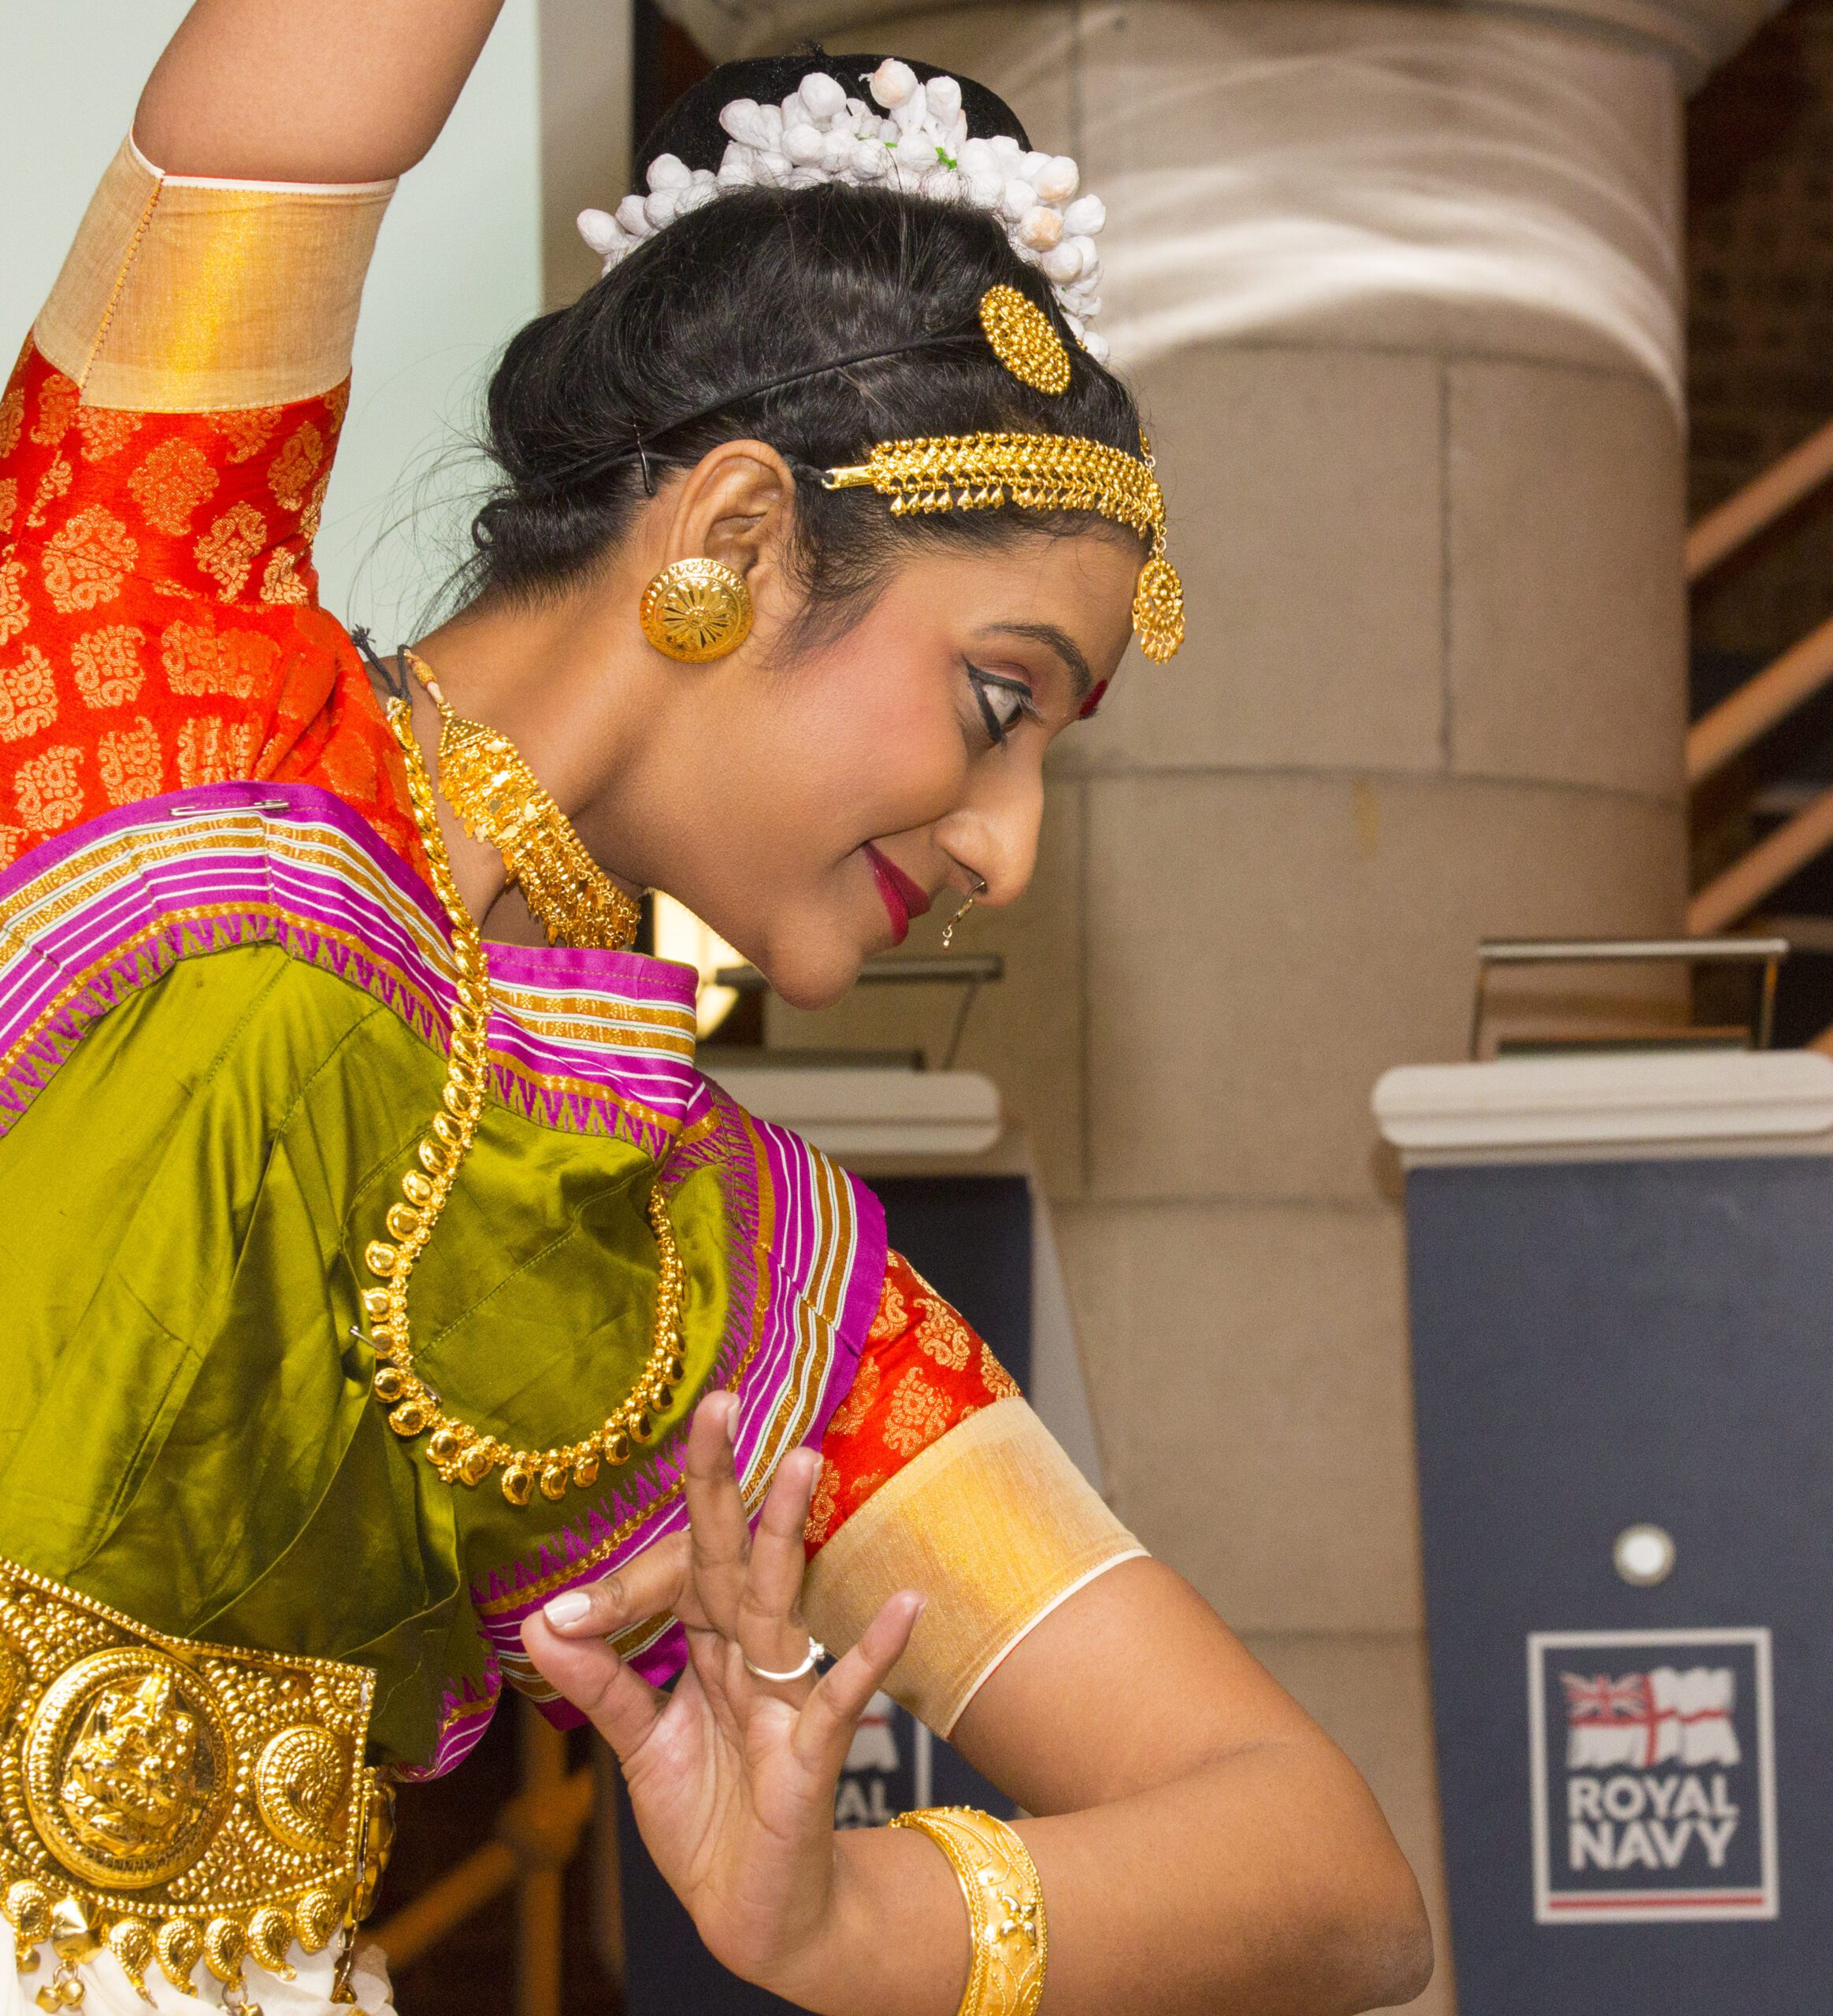 Female dancer in traditional Indian dress